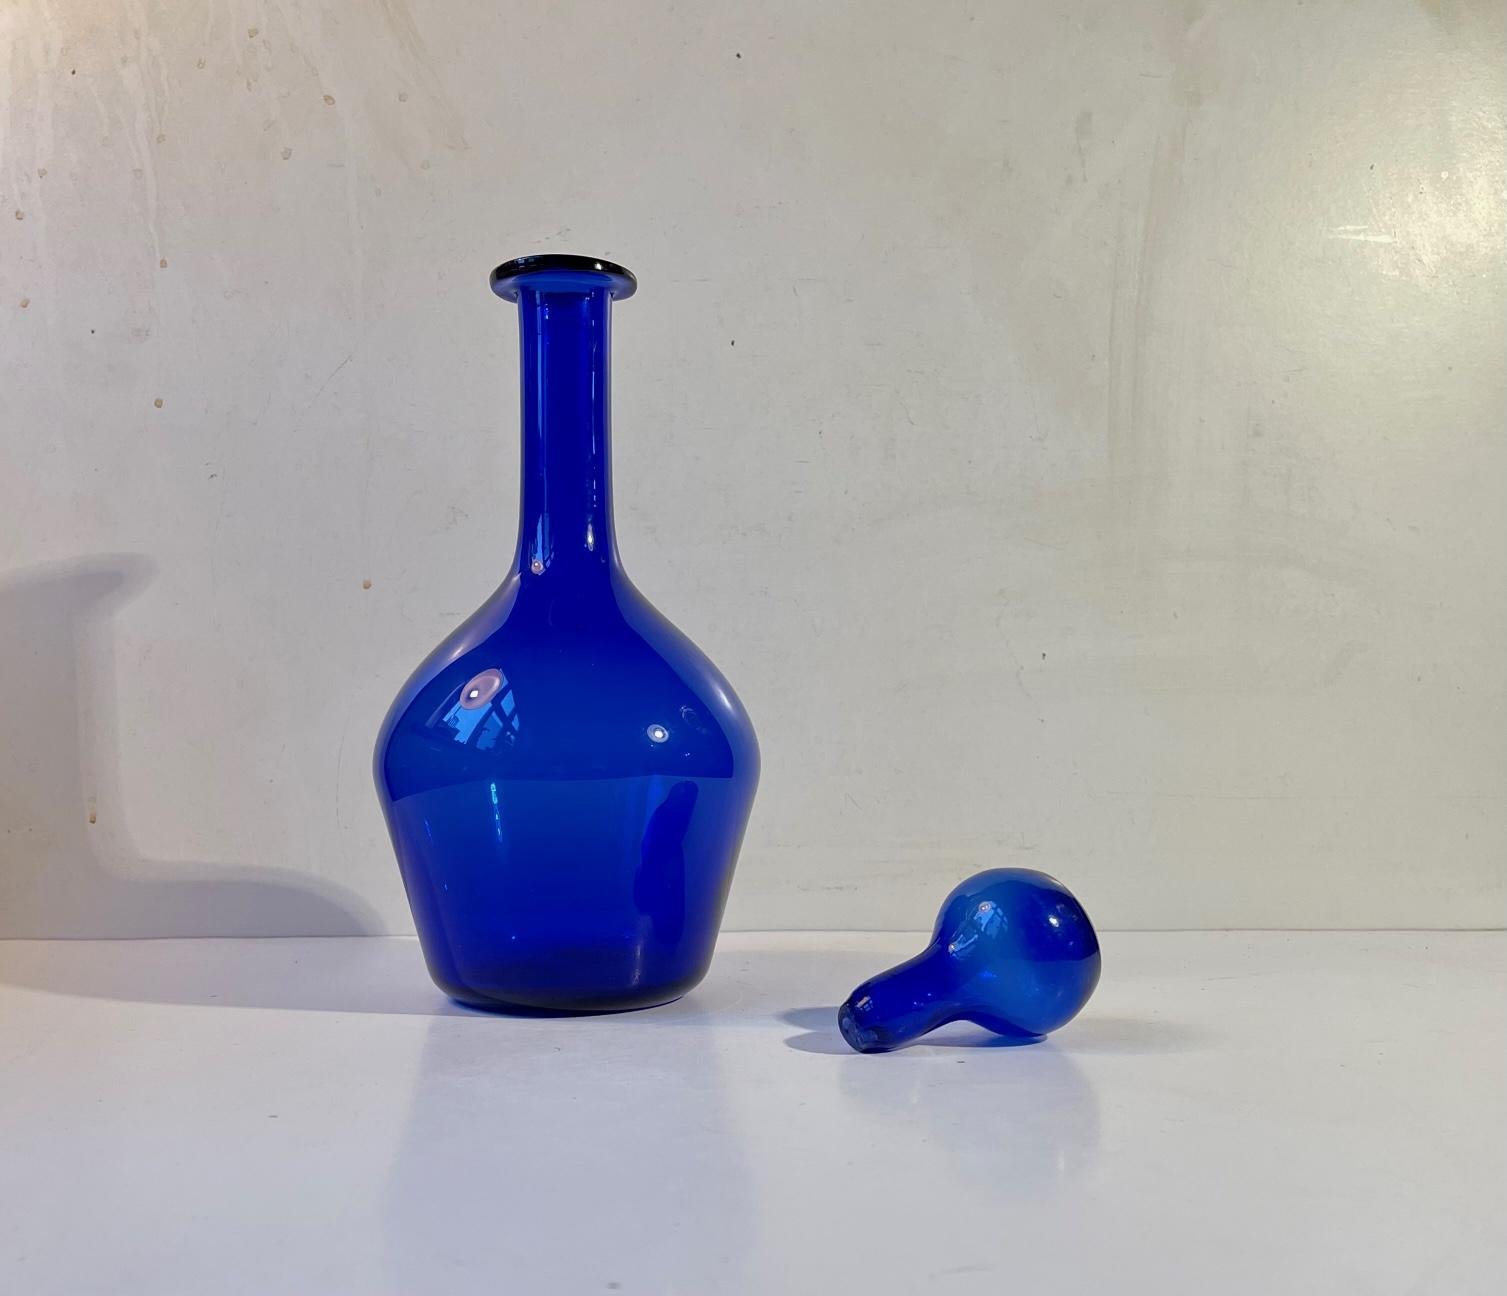 Hand-blown cobalt blue glass decanter with round stopper from Oggretti Murano in Italy. Made during the 1970s or 80s. Measurements: H: 29 cm, D: 13 cm. Capacity: 0.7 liter.